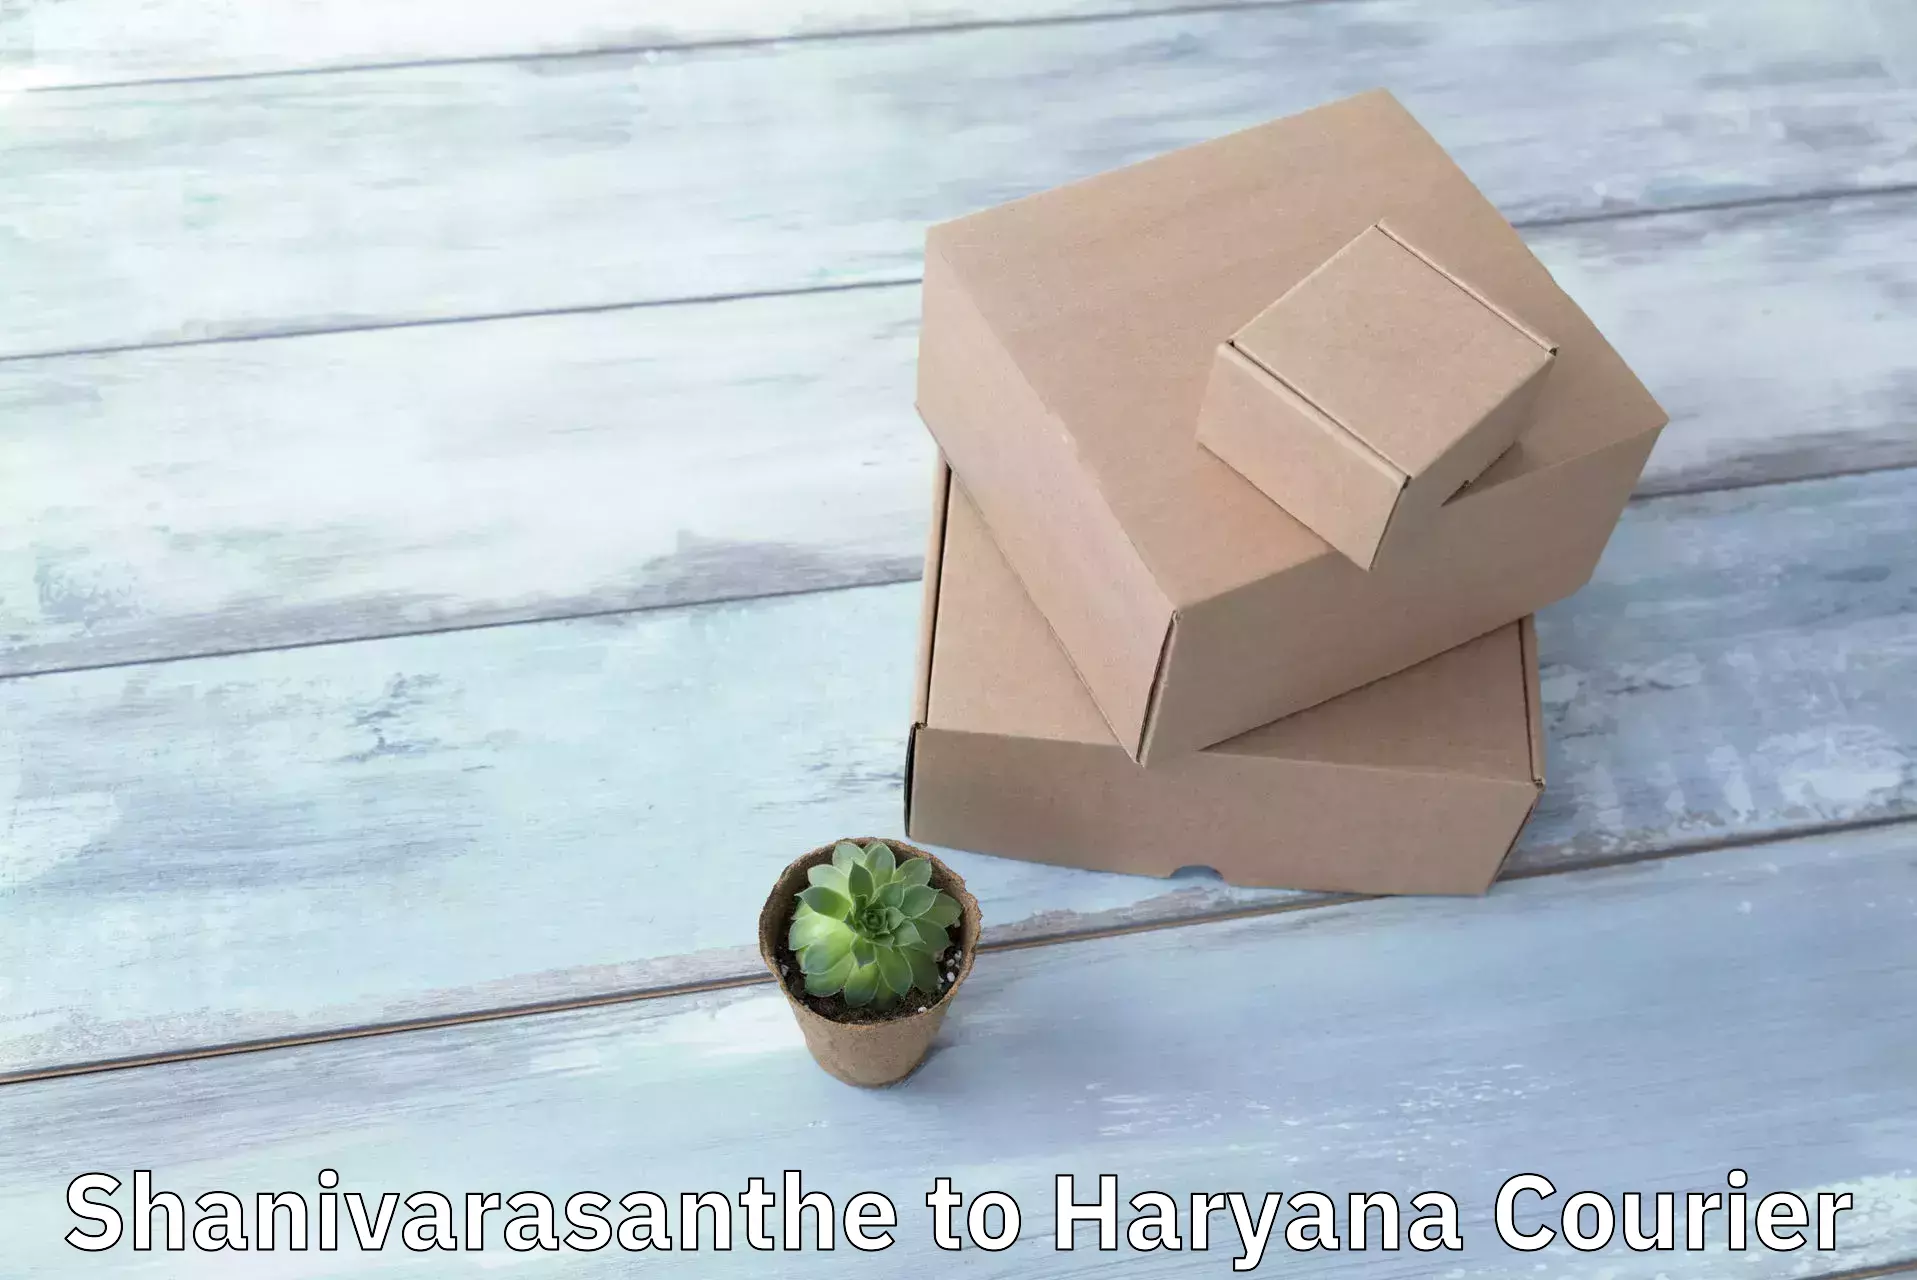 Easy access courier services in Shanivarasanthe to Bilaspur Haryana